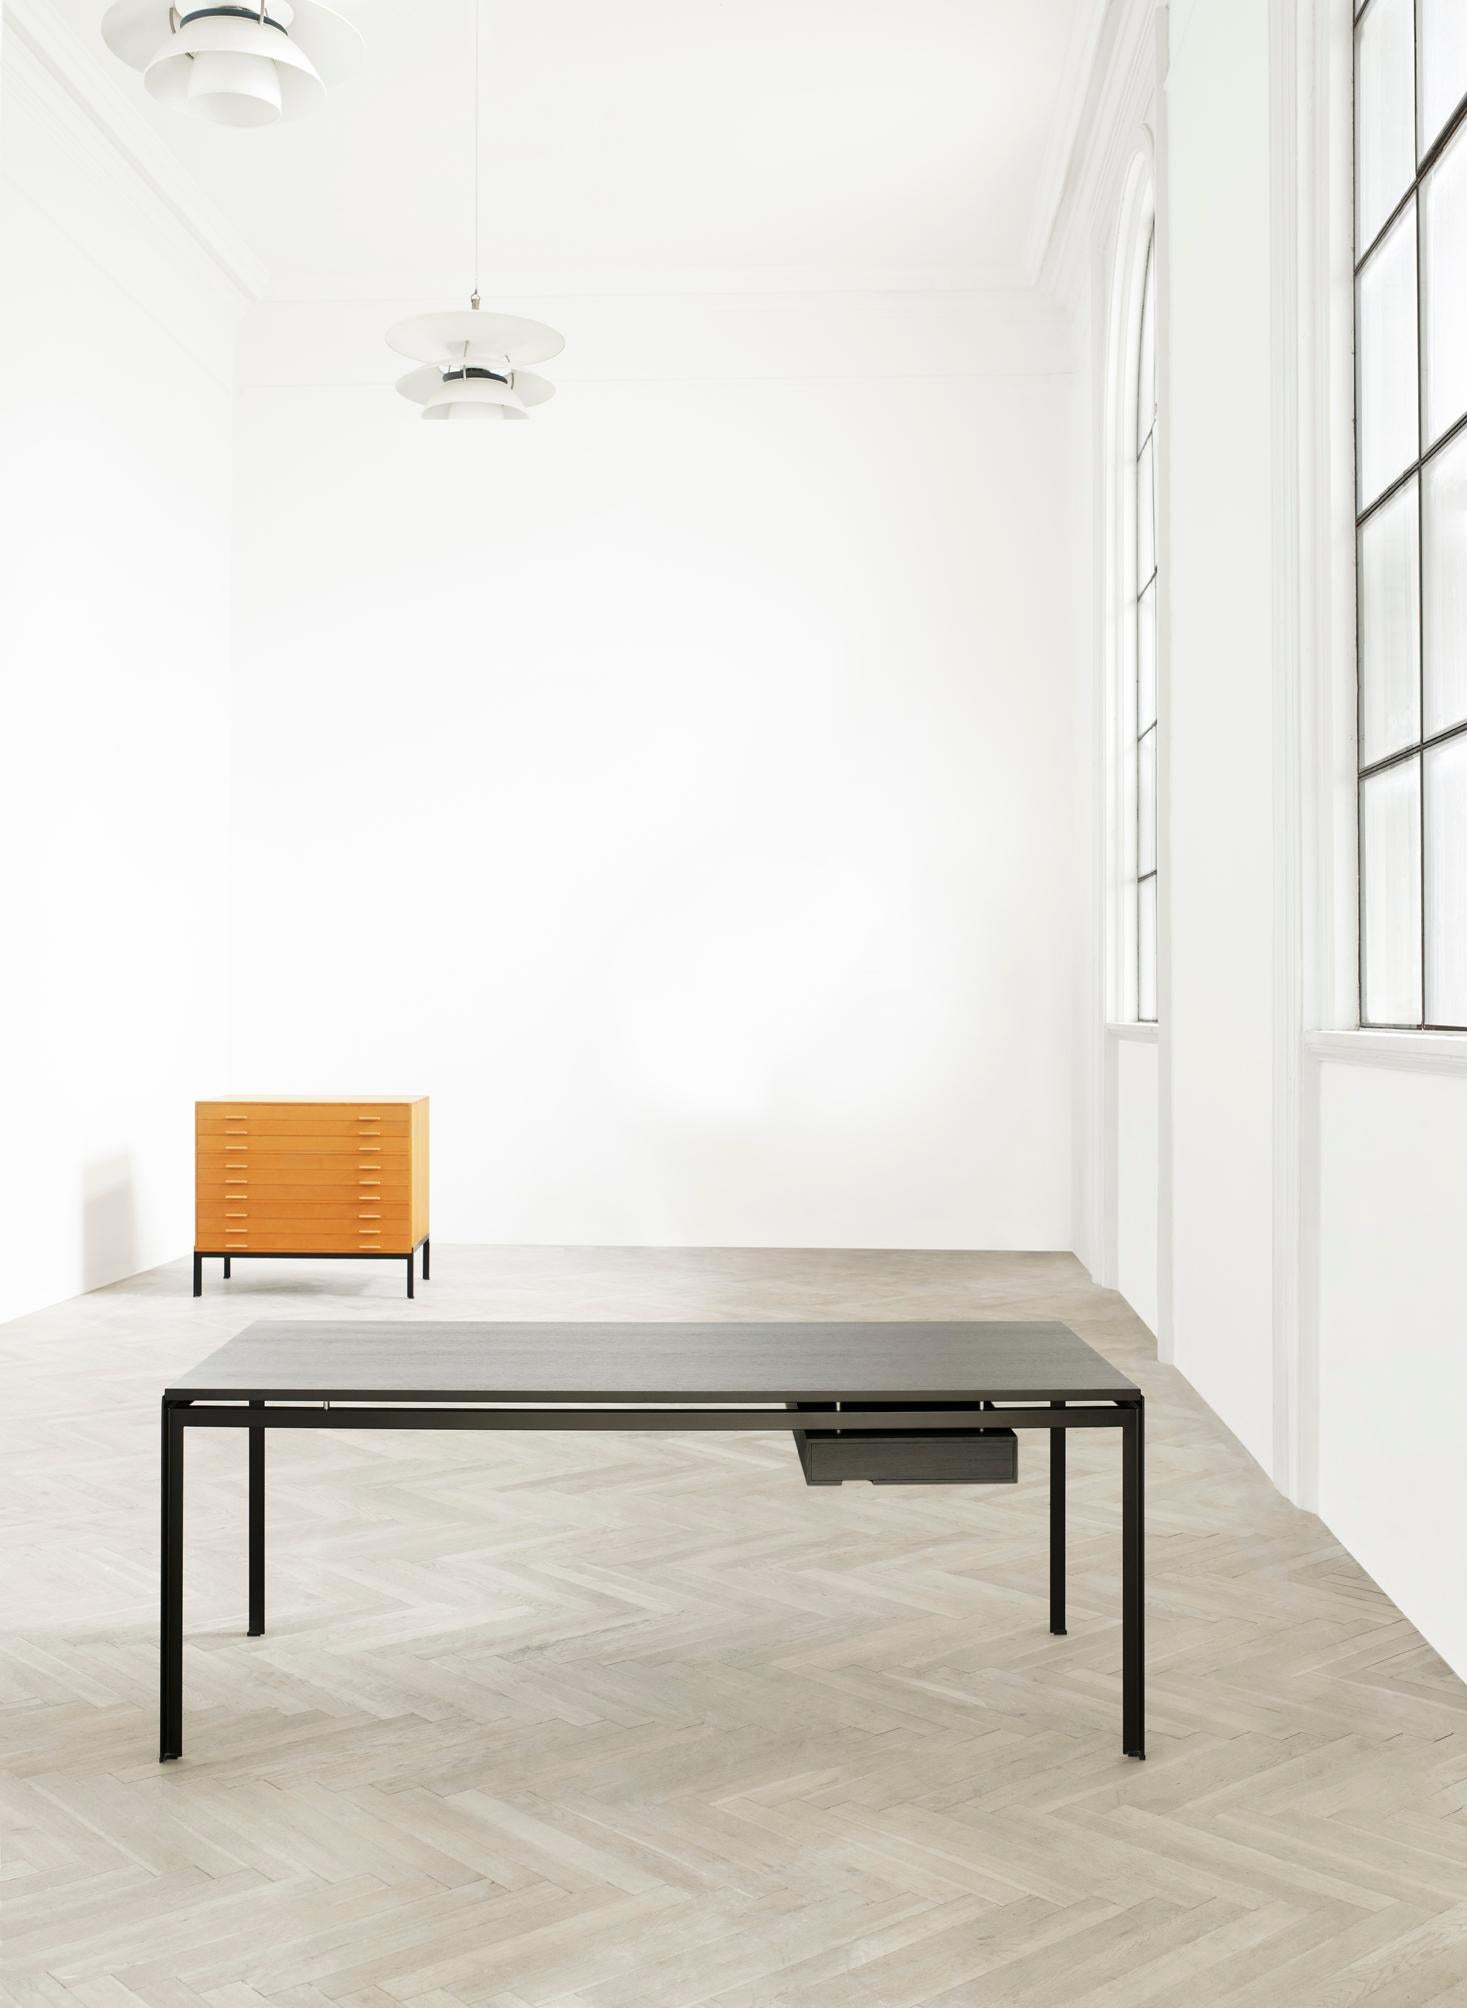 Modern PK52A Student Desk in Wood Finishes with Gray Steel Base by Poul Kjærholm